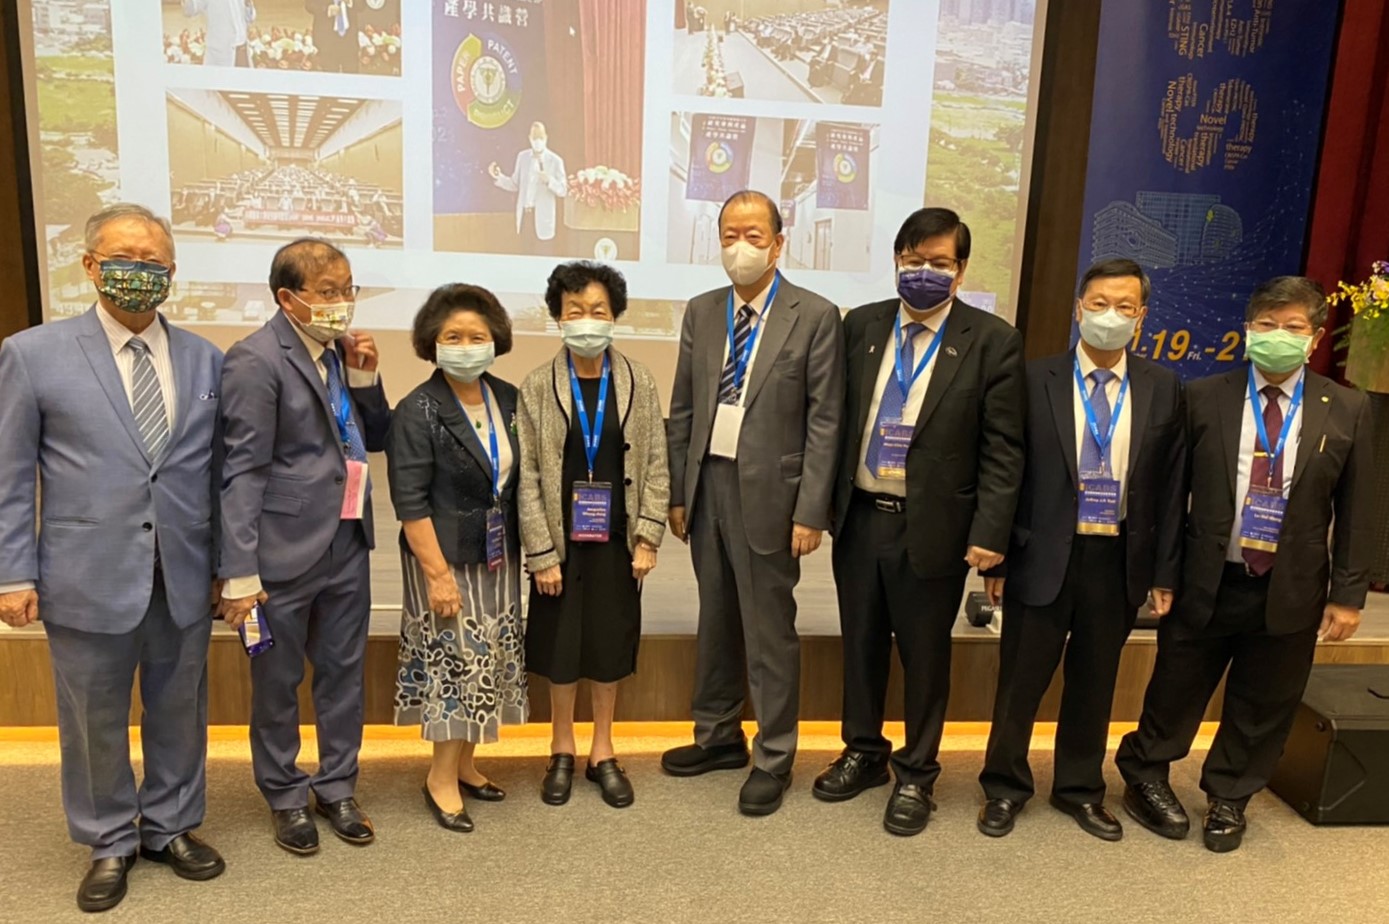 China Asia Associated University System hosted ICABS 2021. Dr. Chang-hai Tsai, Chairman of the Board of Trustees (the fourth from the right), Dr. Mien-Chie Hung, President of CMU (the third from the right), and Dr. Jeffrey J. P. Tsai, President of AU (the second from the right).